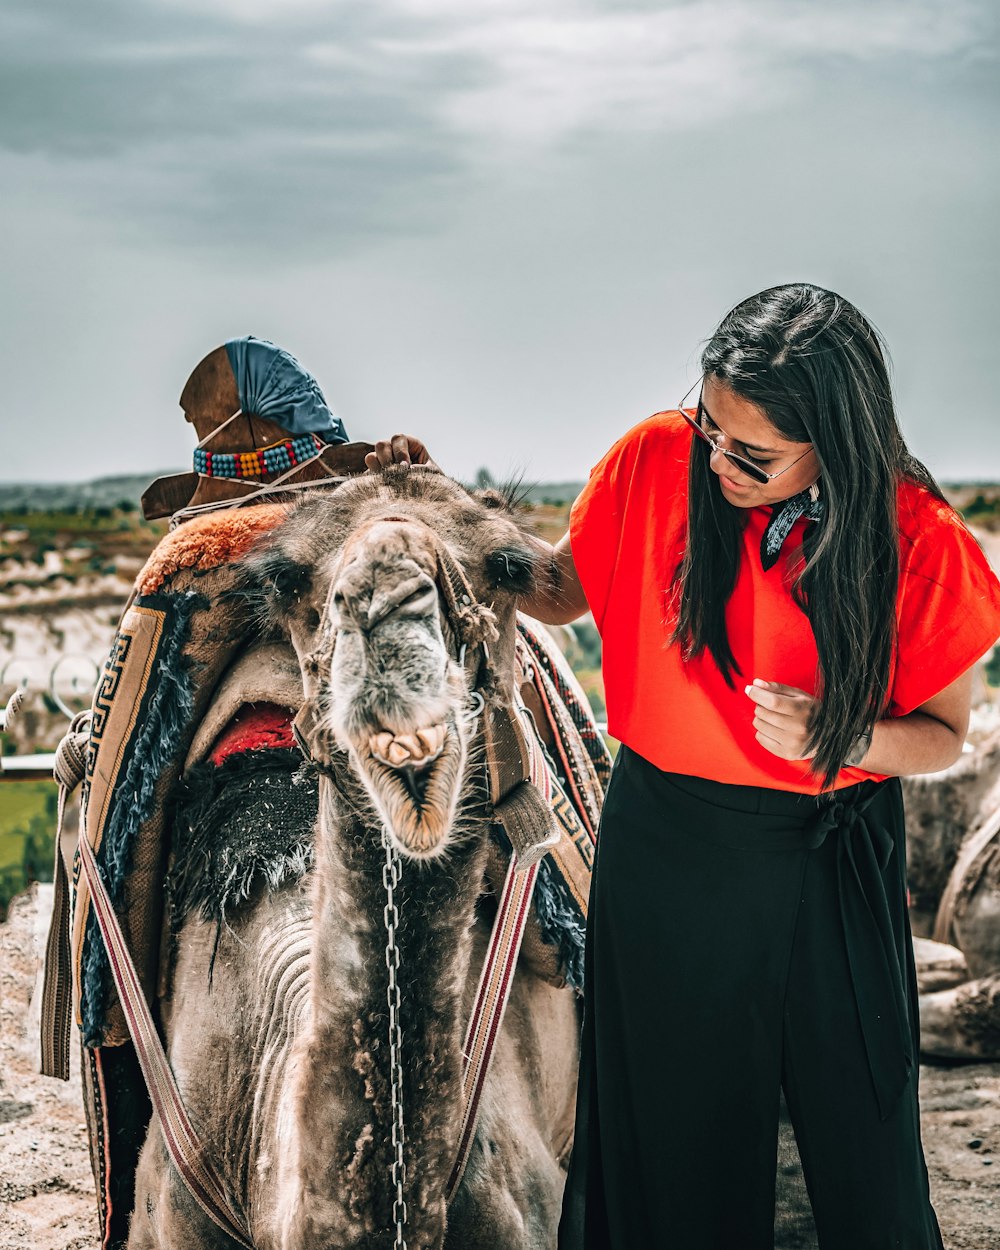 woman in black dress standing beside brown camel during daytime